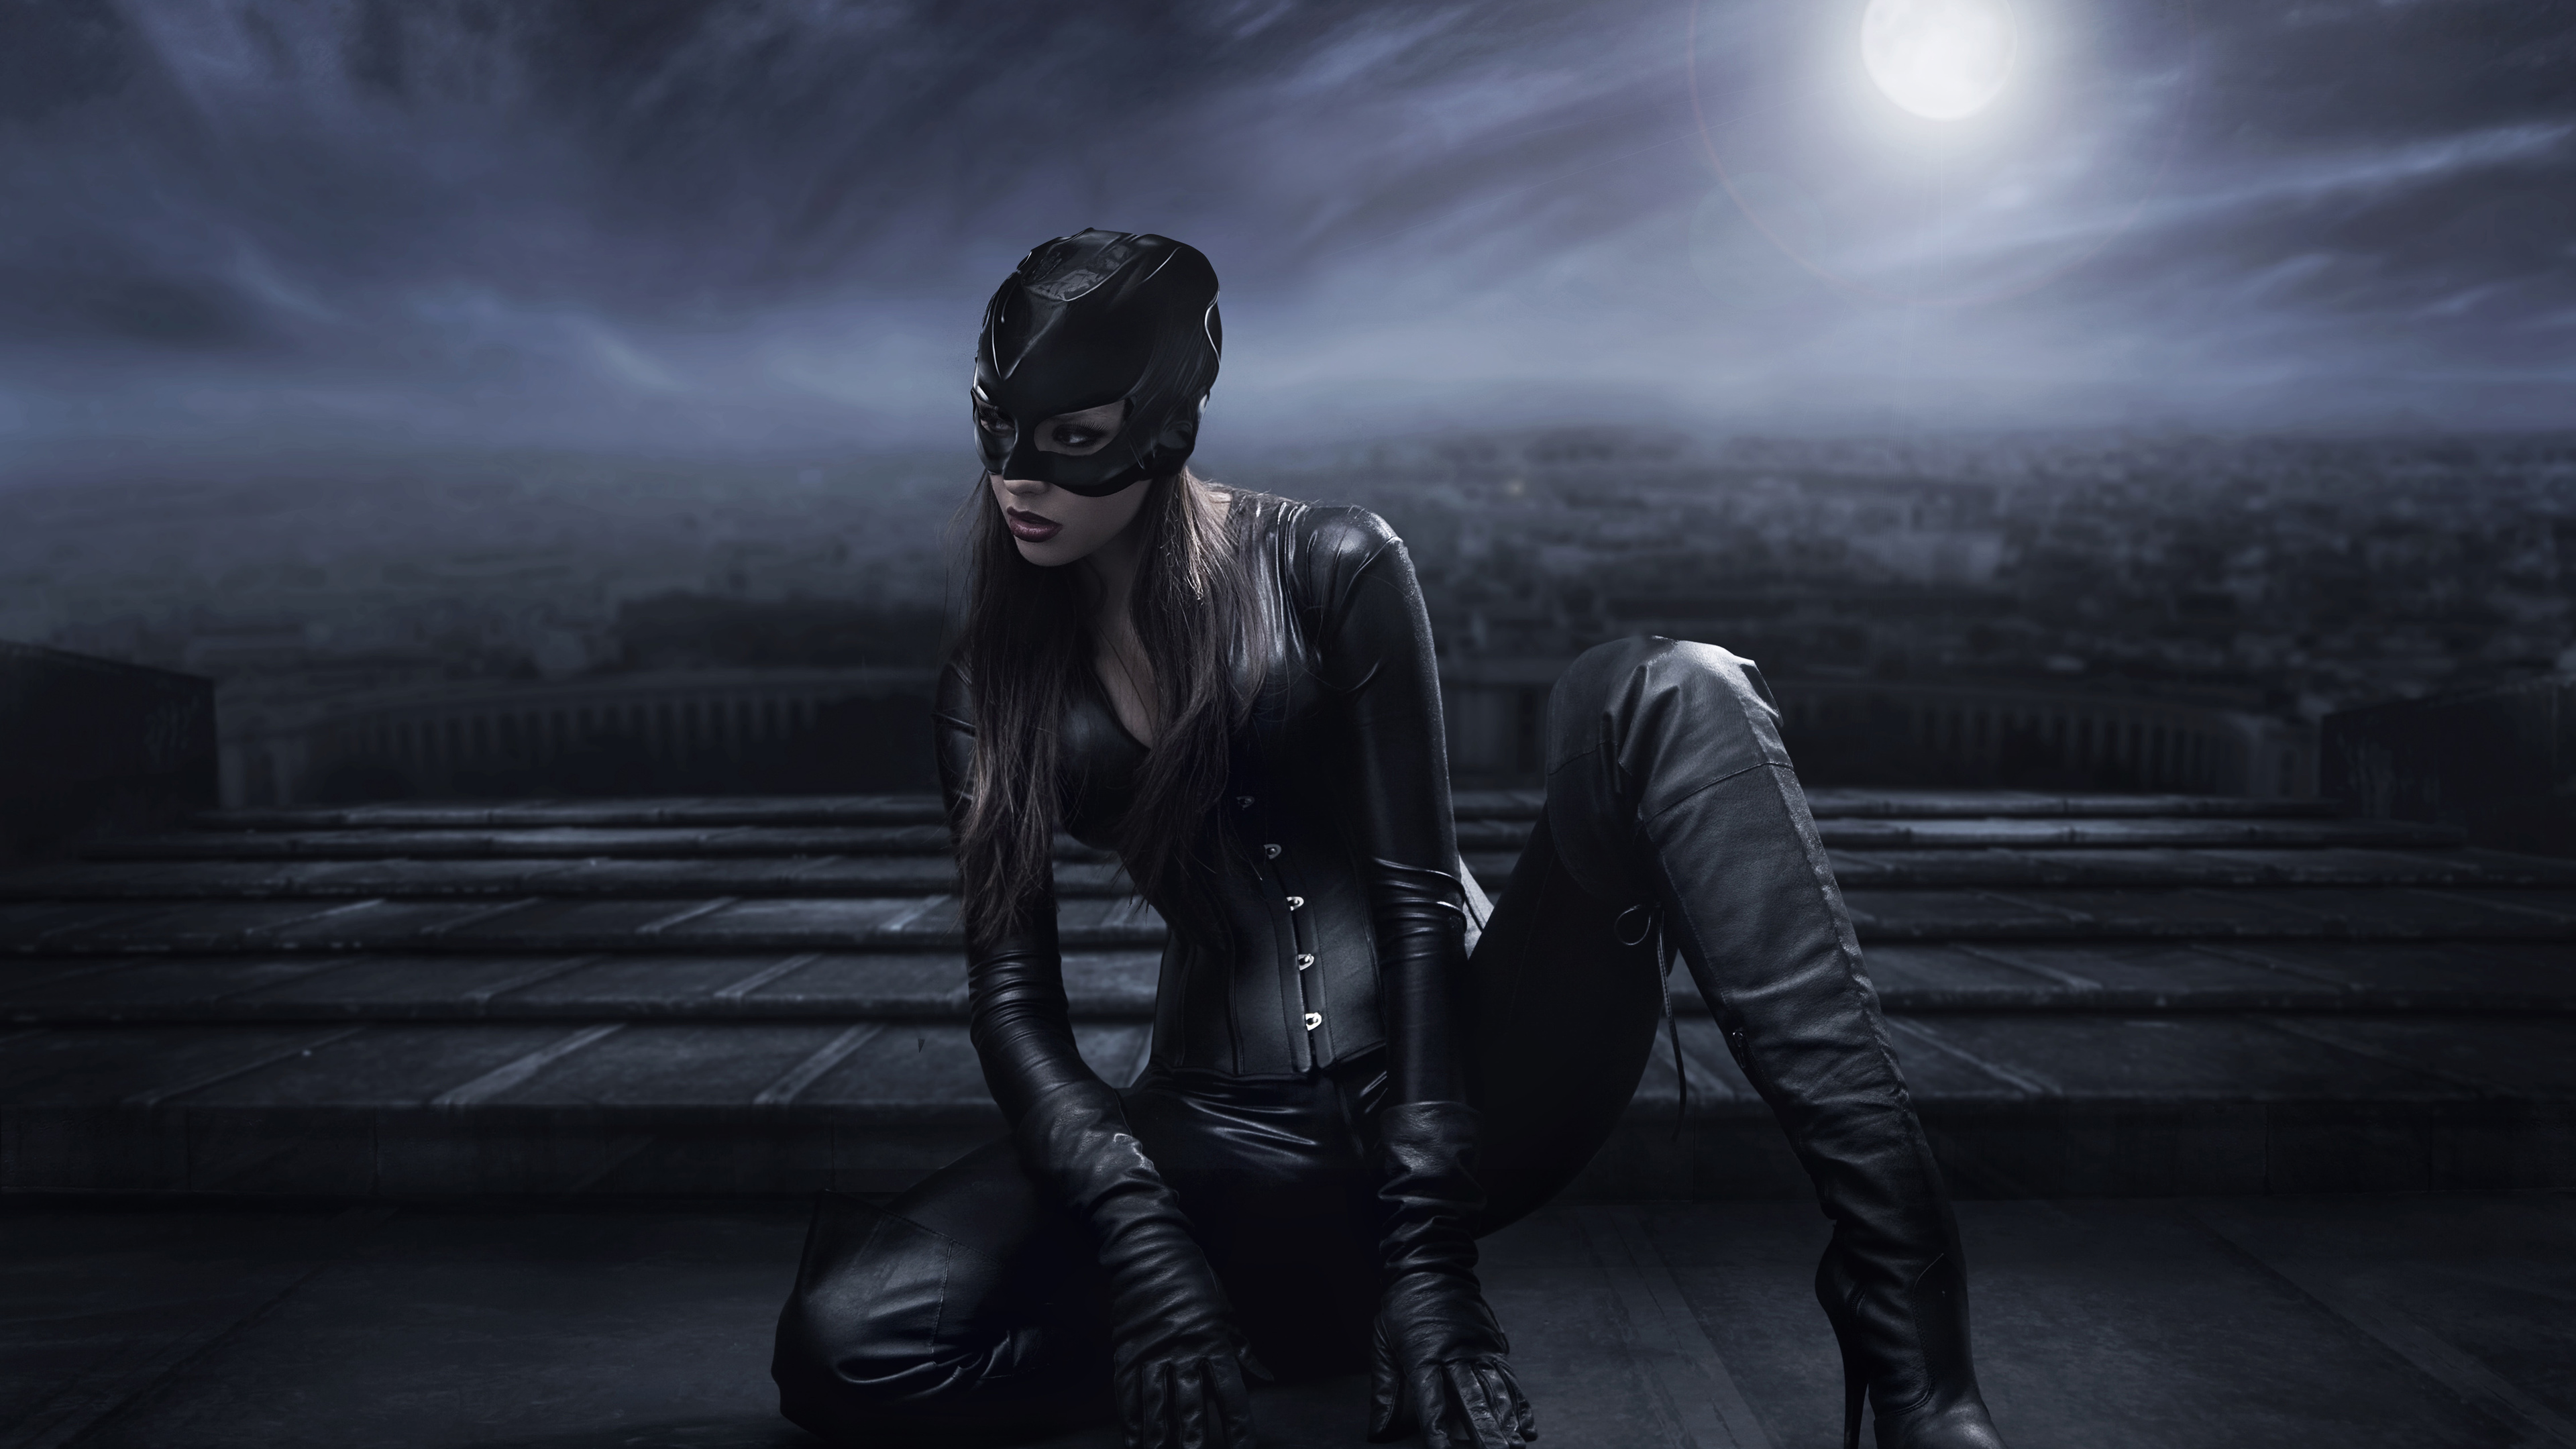 catwoman cosplay 10k 1536523866 - Catwoman Cosplay 10k - superheroes wallpapers, hd-wallpapers, cosplay wallpapers, catwoman wallpapers, 8k wallpapers, 5k wallpapers, 4k-wallpapers, 10k wallpapers